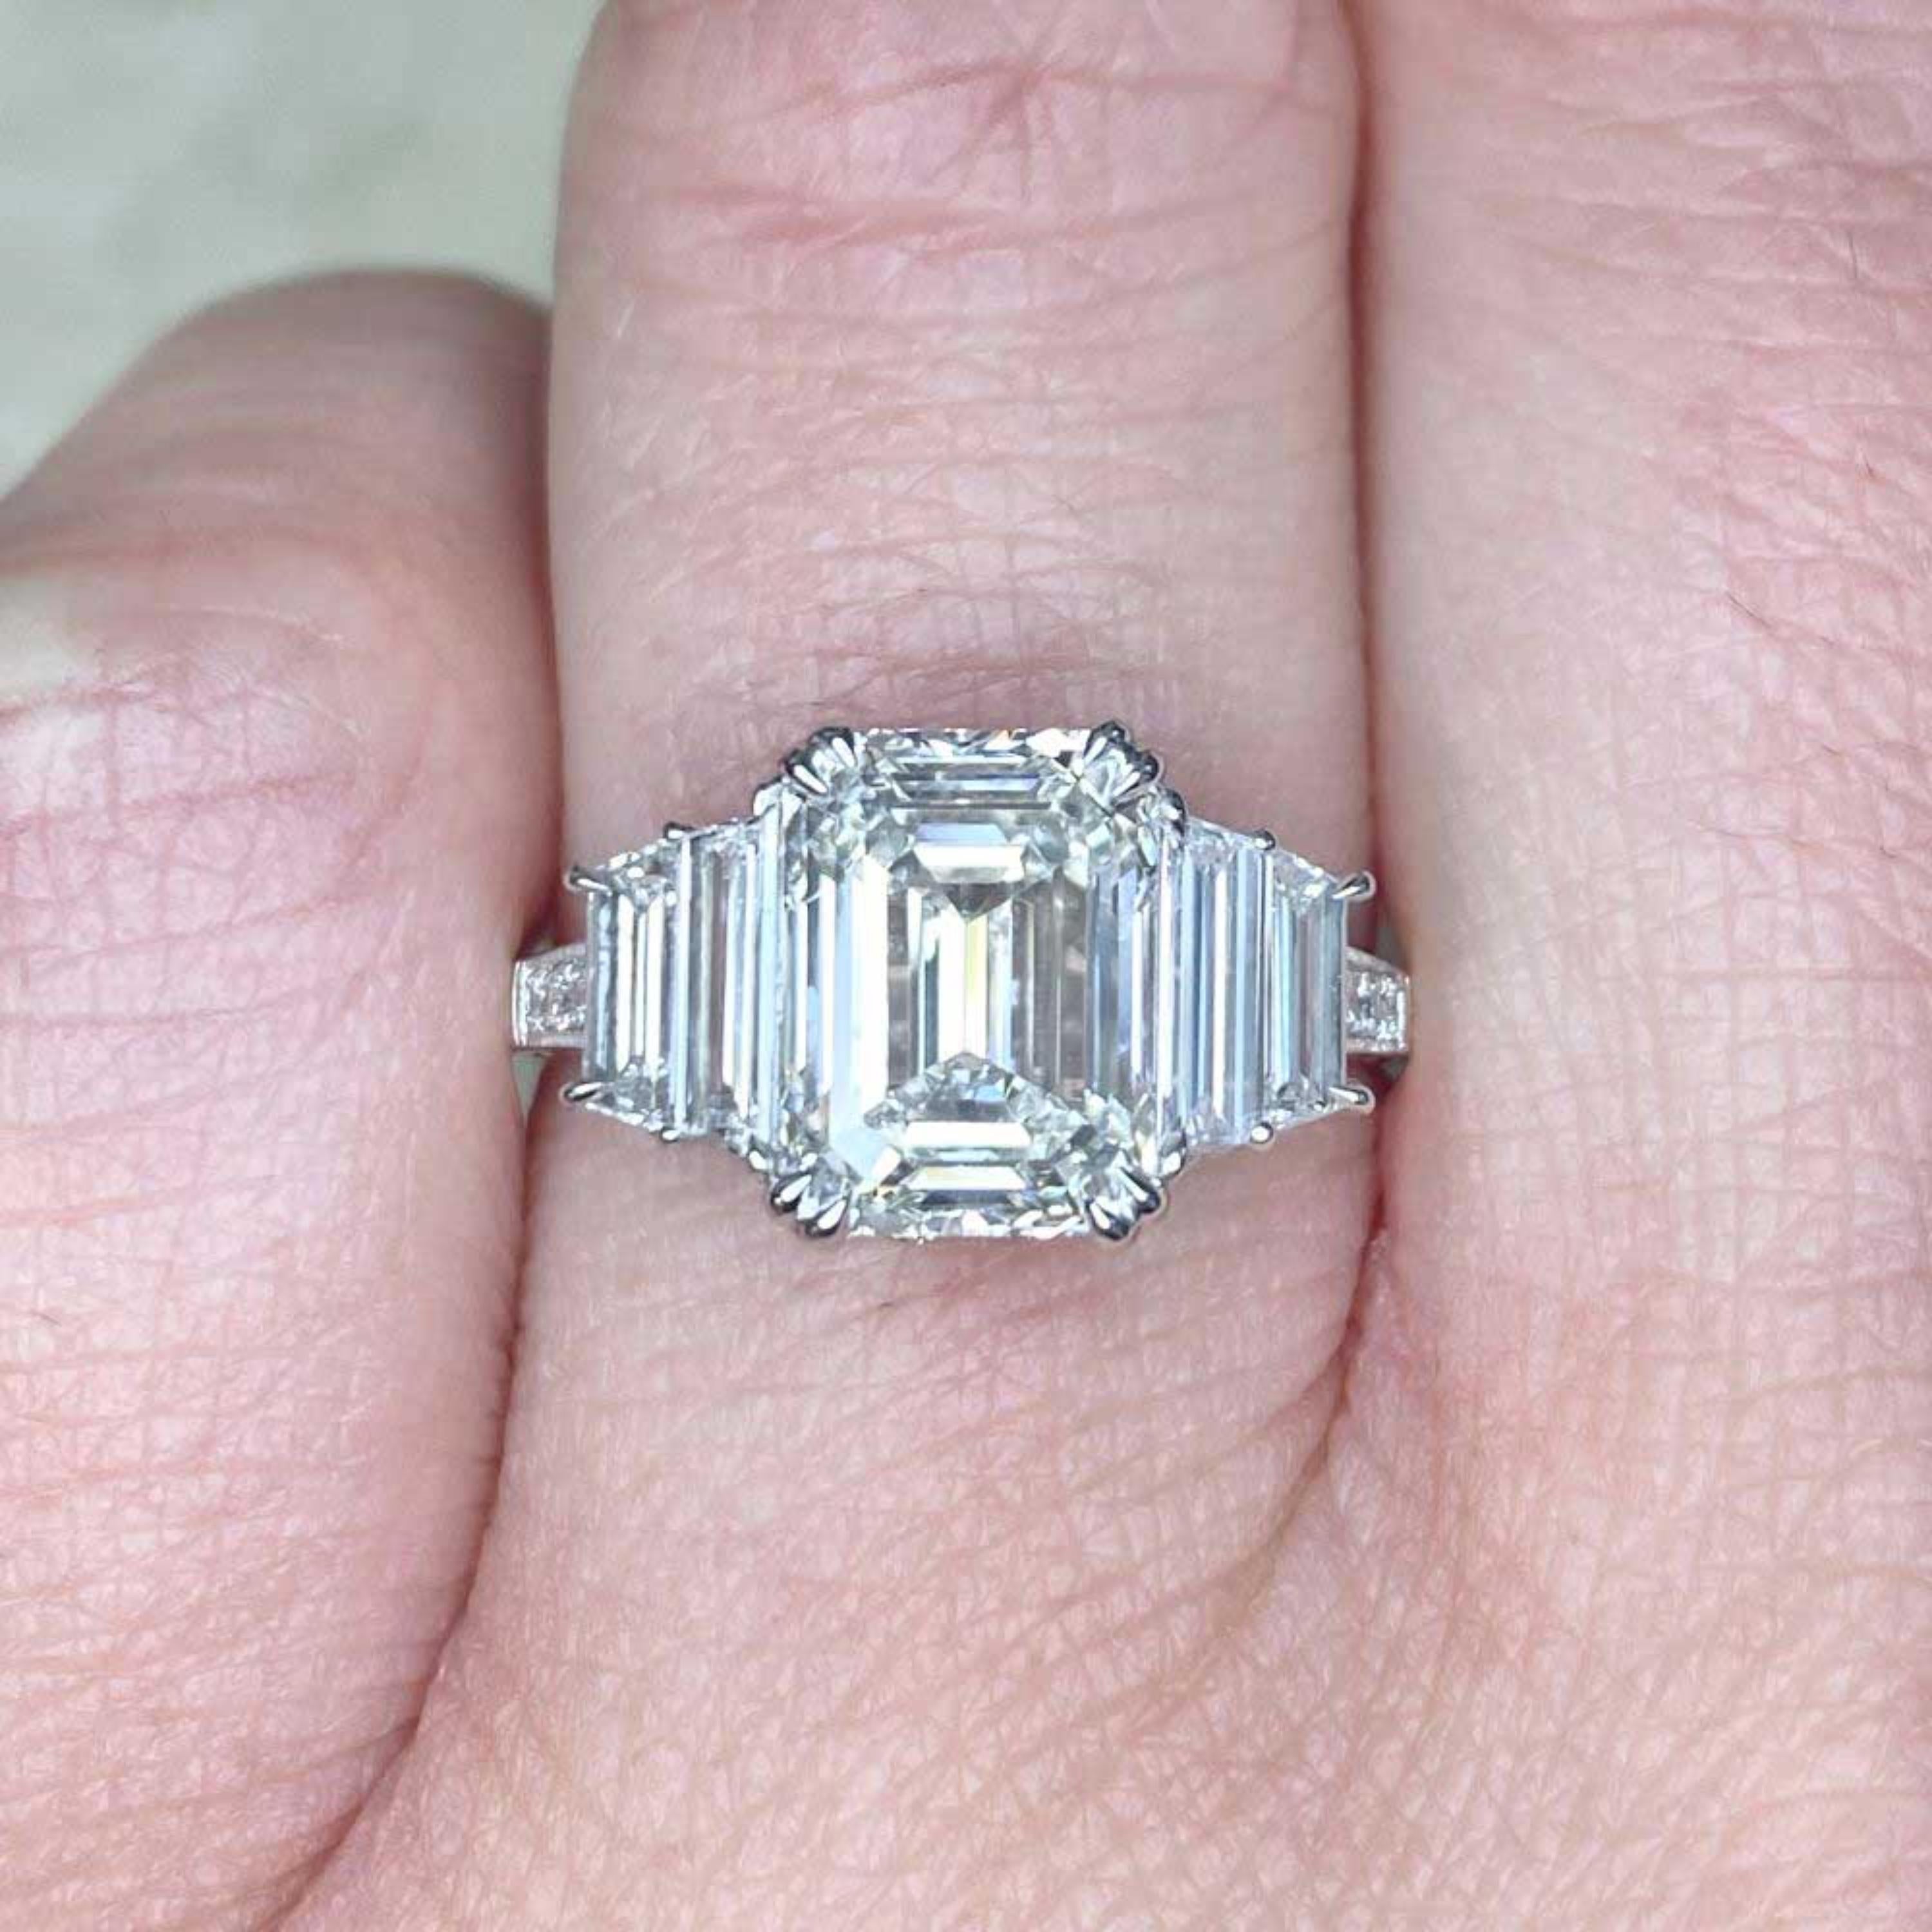 3.15 Carat H VS1 Emerald Cut Diamond Platinum Engagement Ring GIA Certified

A stunning ring featuring IGI/GIA Certified 2.12 Carat Emerald Cut Natural Diamond and 1.03 Carats of Diamond Accents set in Platinum.

A Diamond Is Forever - Diamonds have